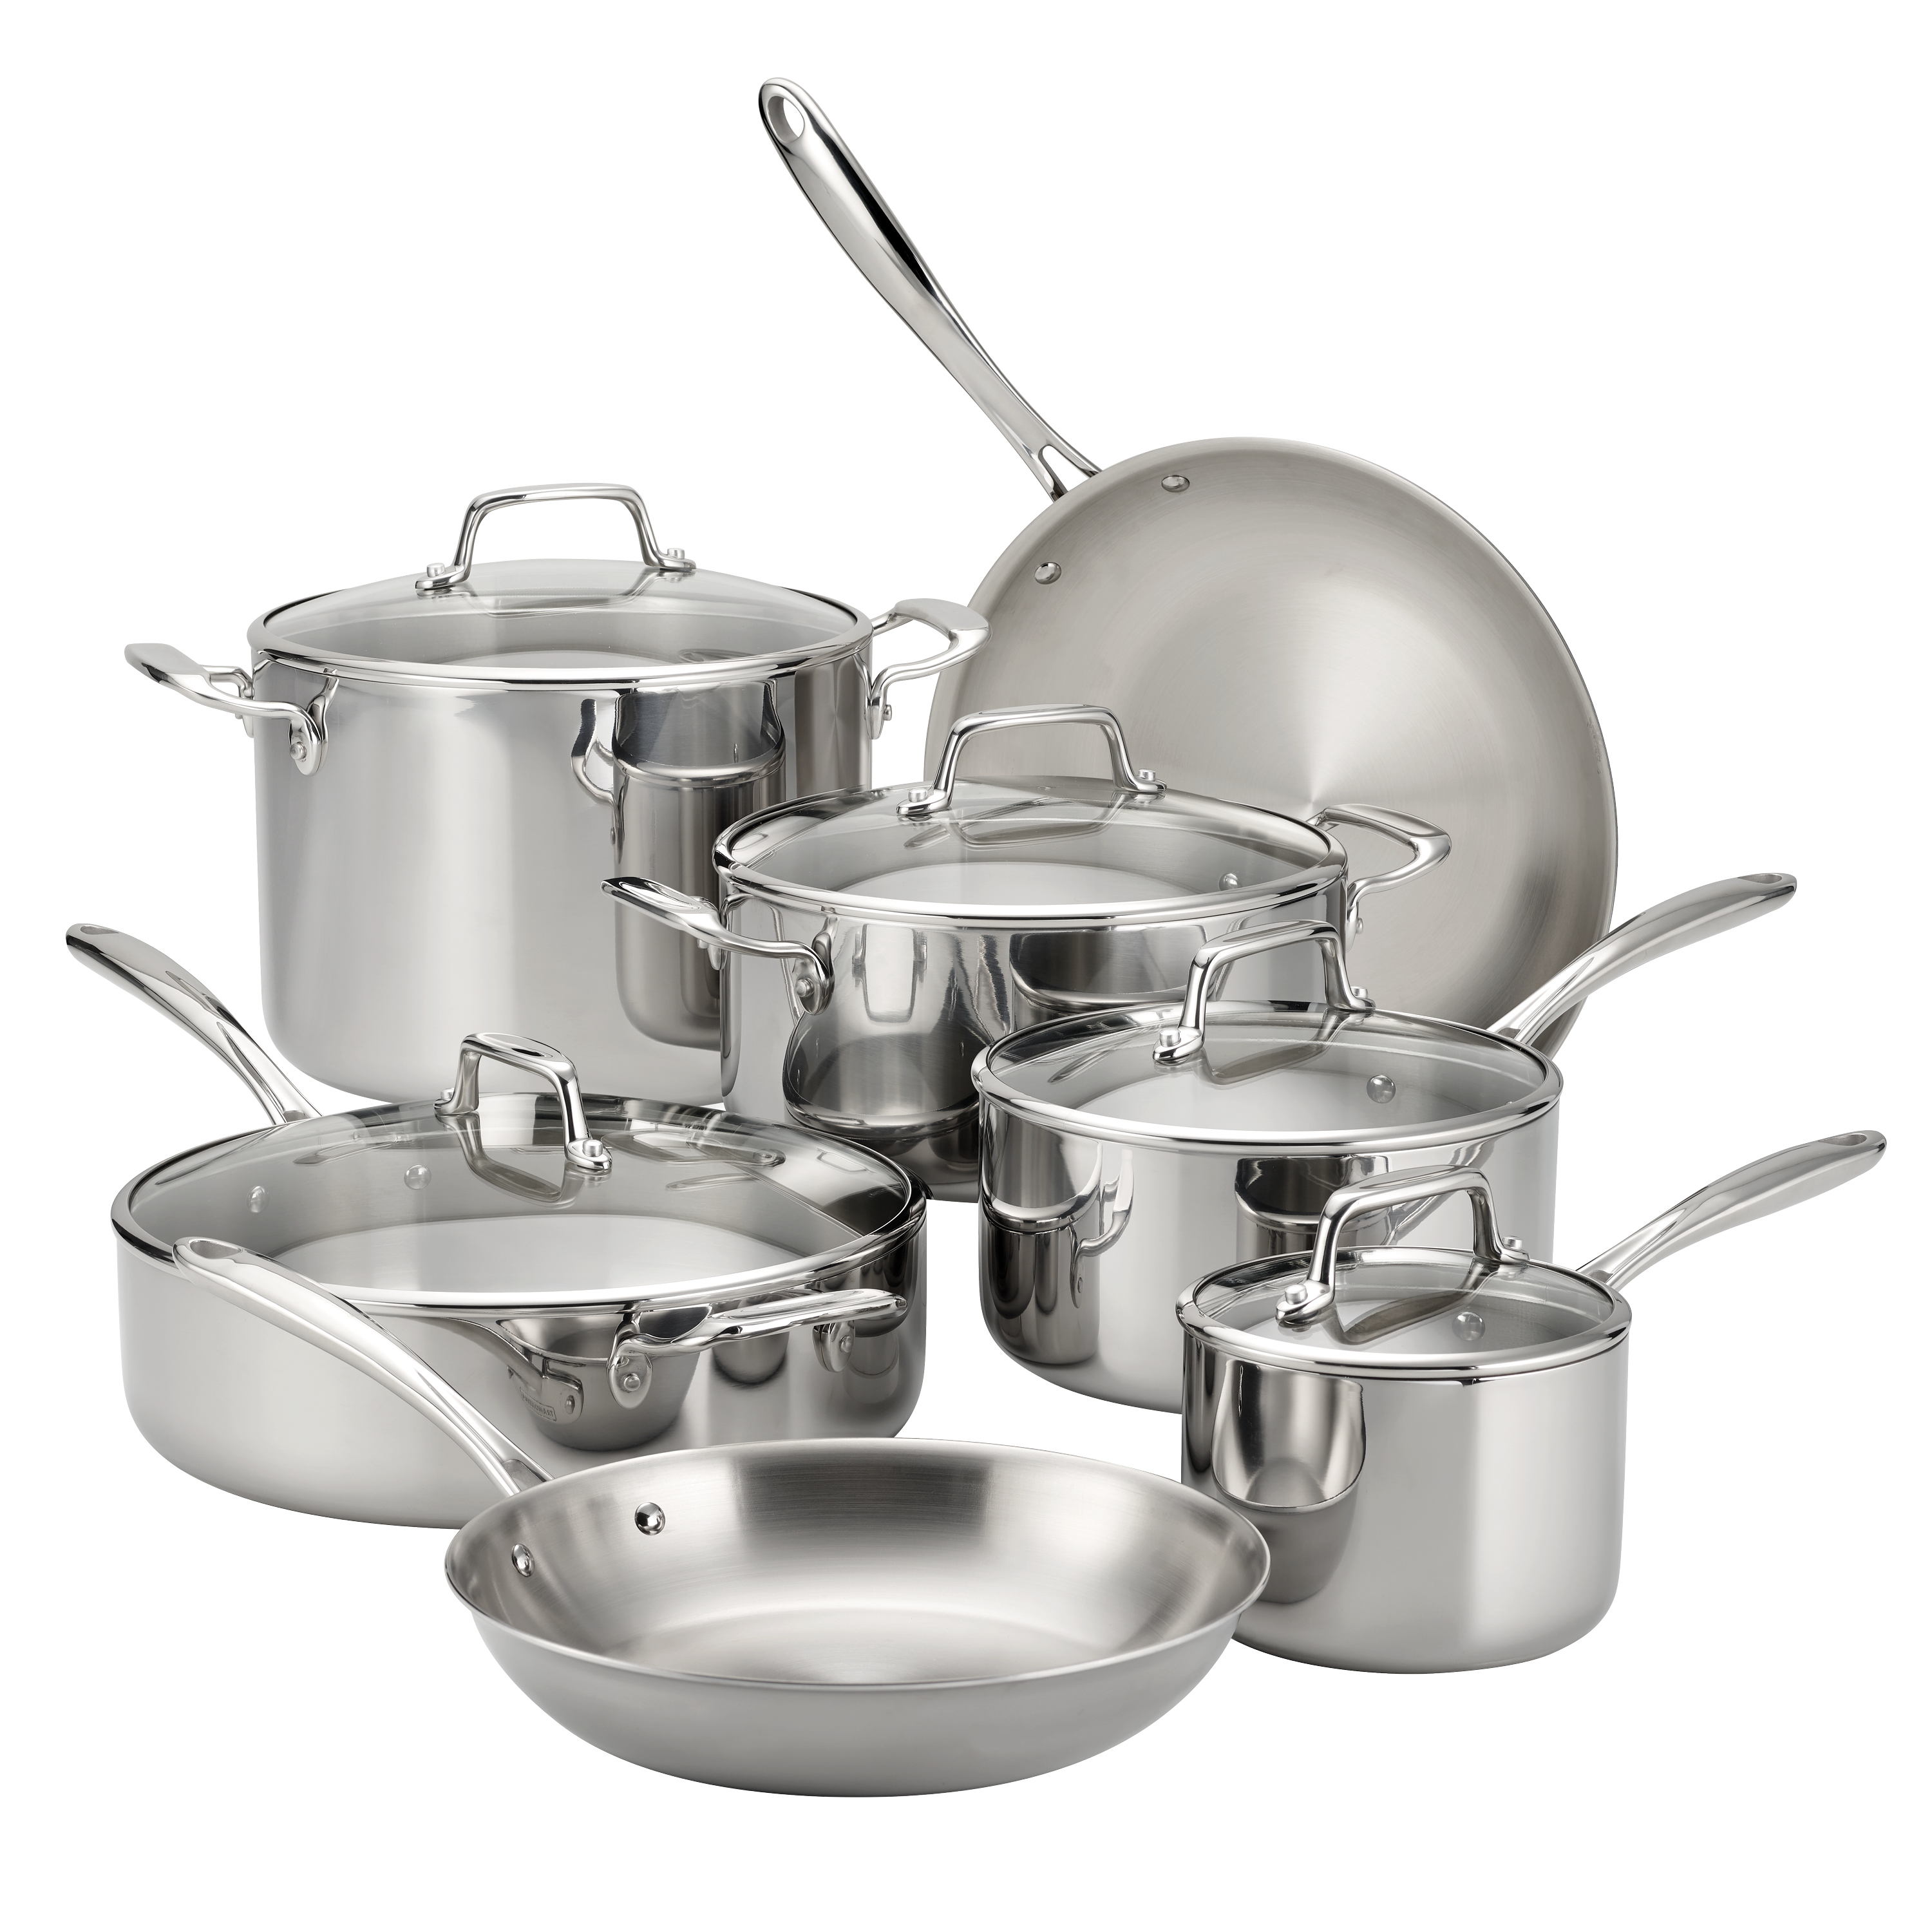 Tramontina 12-Piece Tri-Ply Clad Stainless Steel Cookware Set, with Glass Lids - image 1 of 16